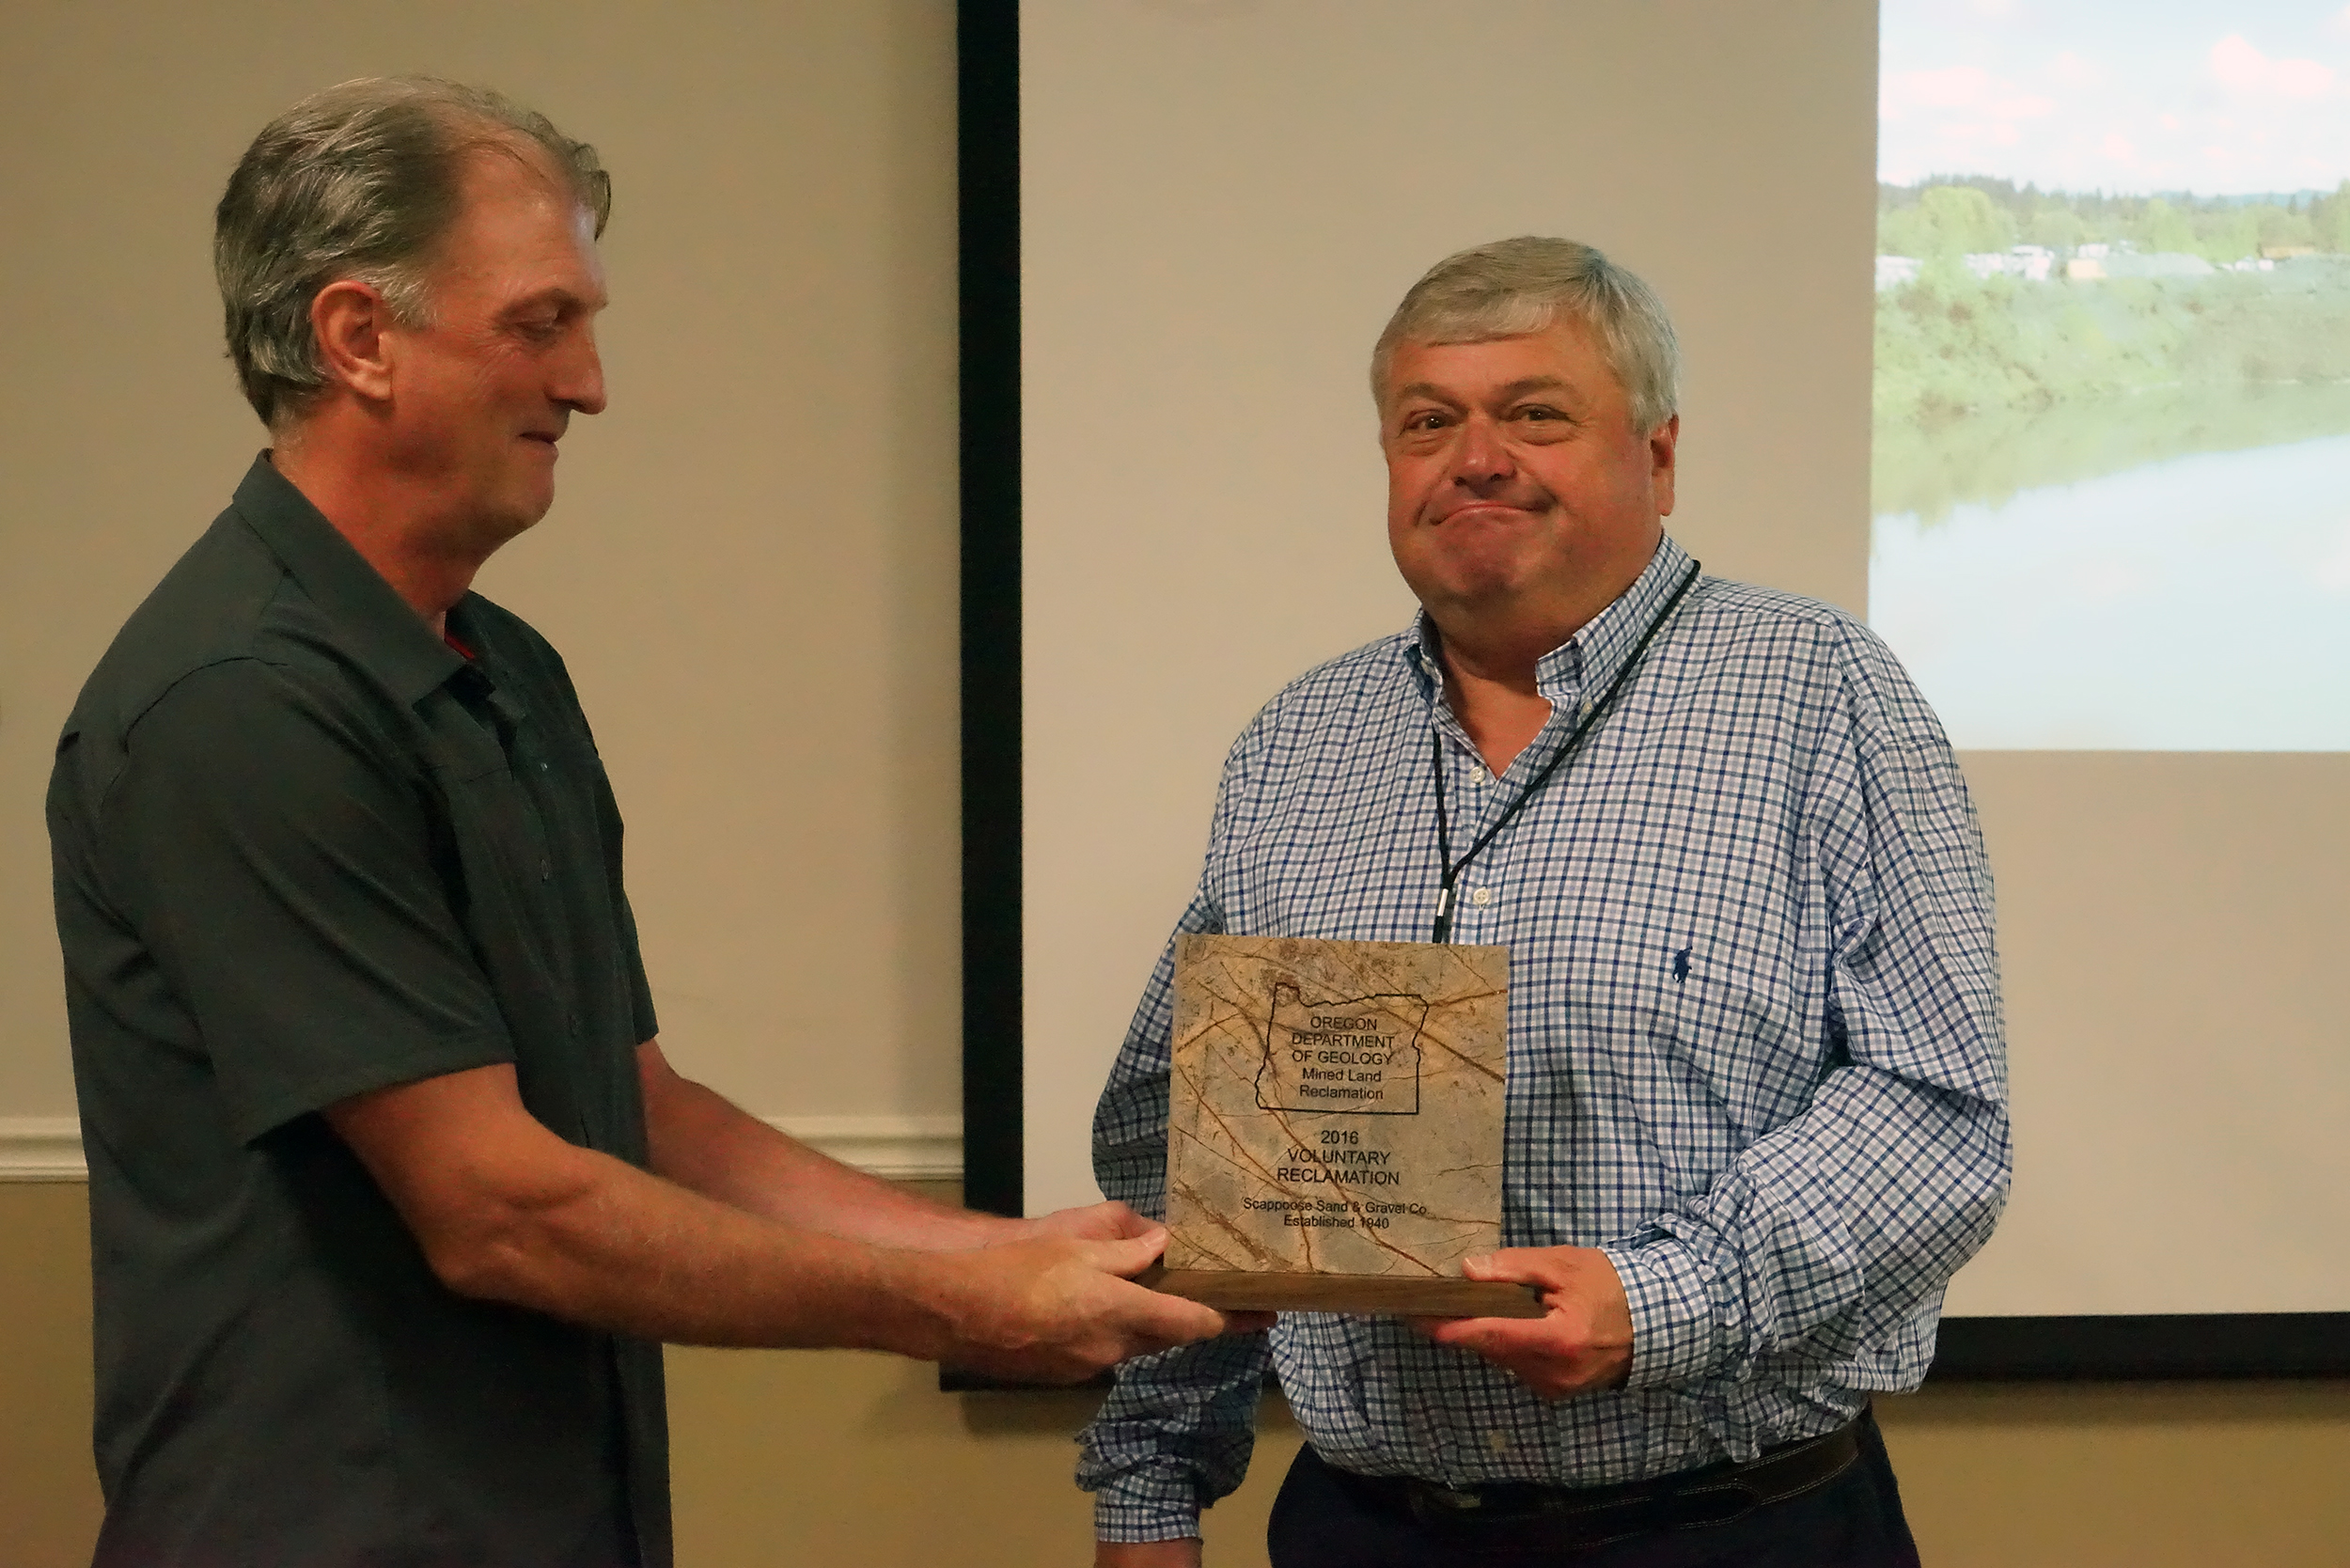 Scott Parker of Scappoose Sand & Gravel received the Voluntary Reclamation Award for 2016